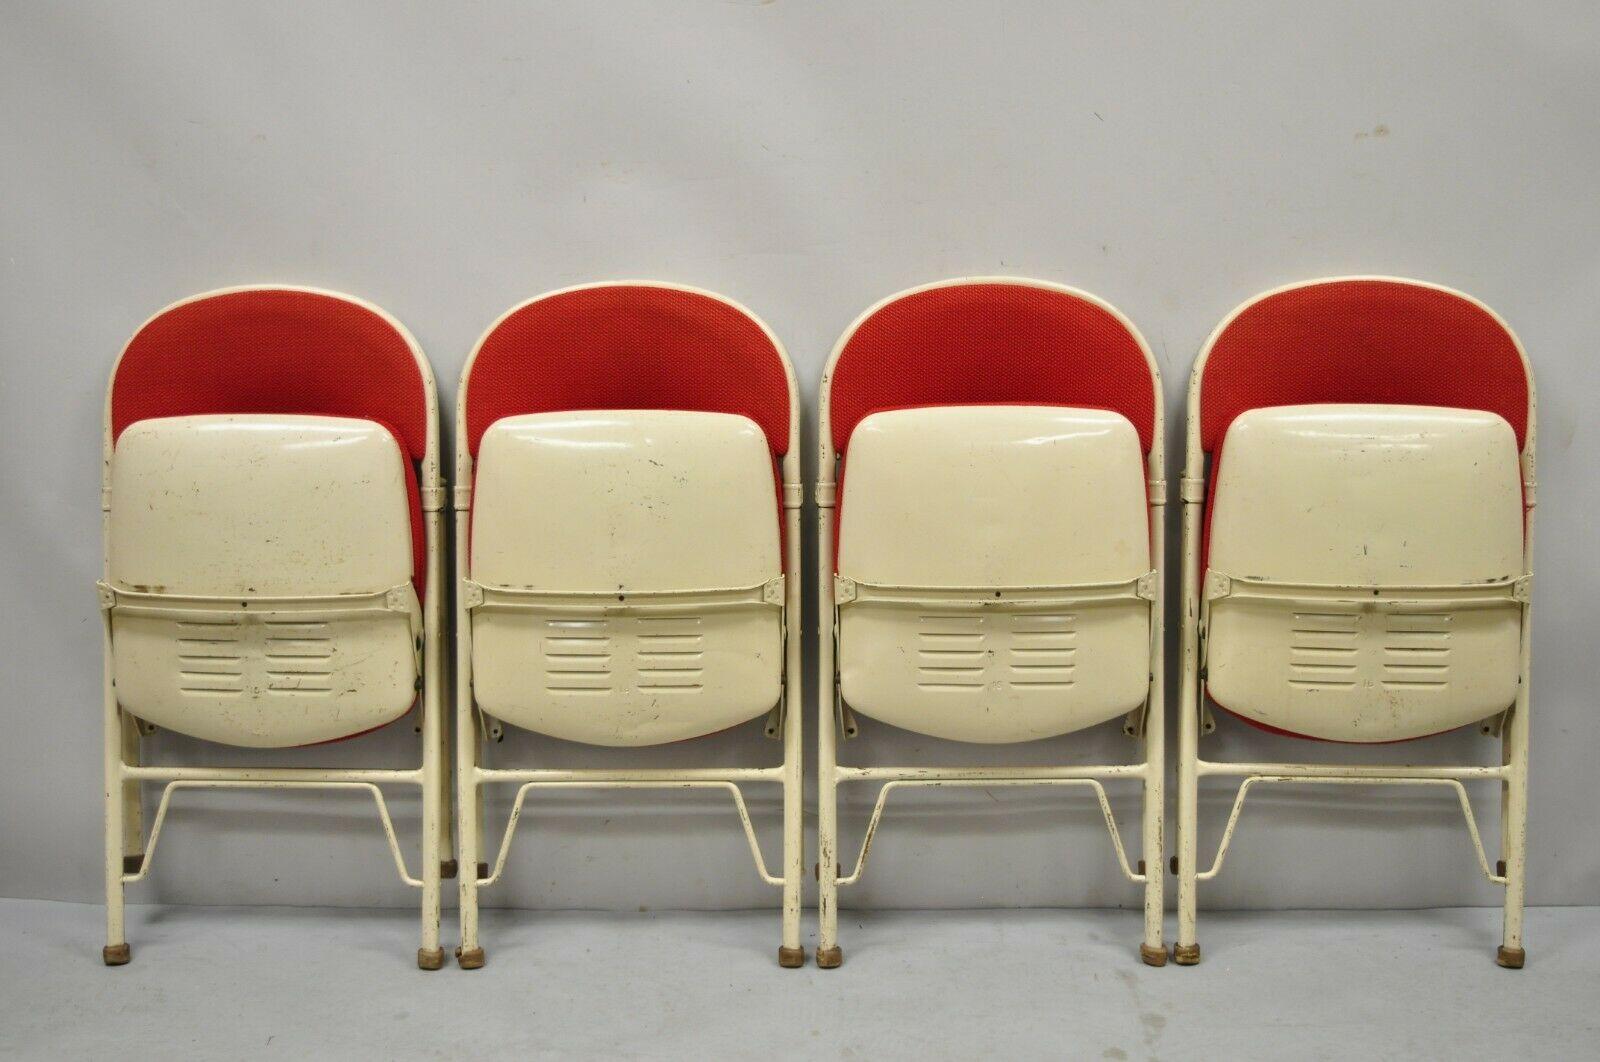 Vintage American seating metal frame red upholstered folding chairs - Set of 4. Item features (4) folding chairs, unique metal frames, original red upholstery, original label, very nice vintage set, quality American craftsmanship, great style and